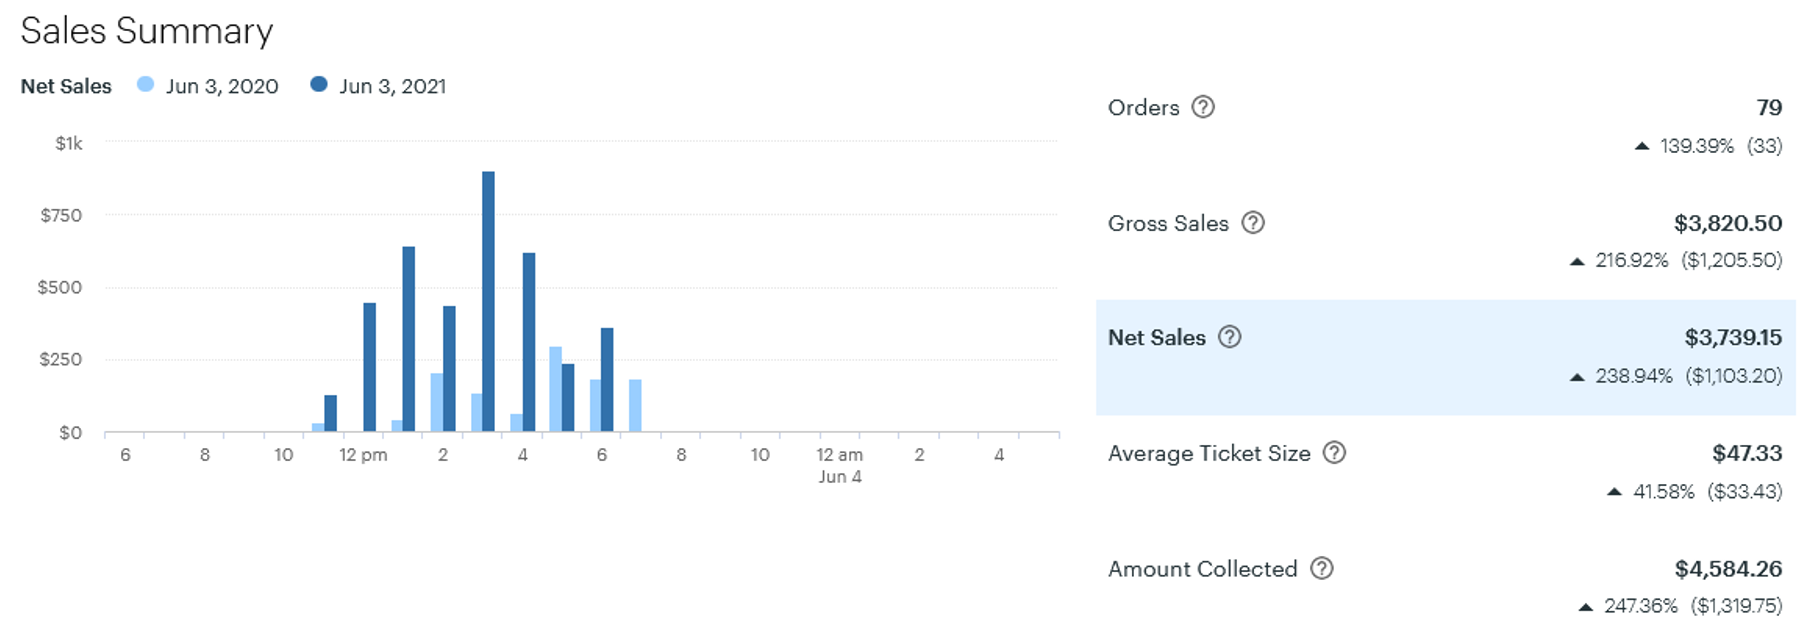 Sales Summary report from Clover dashboard